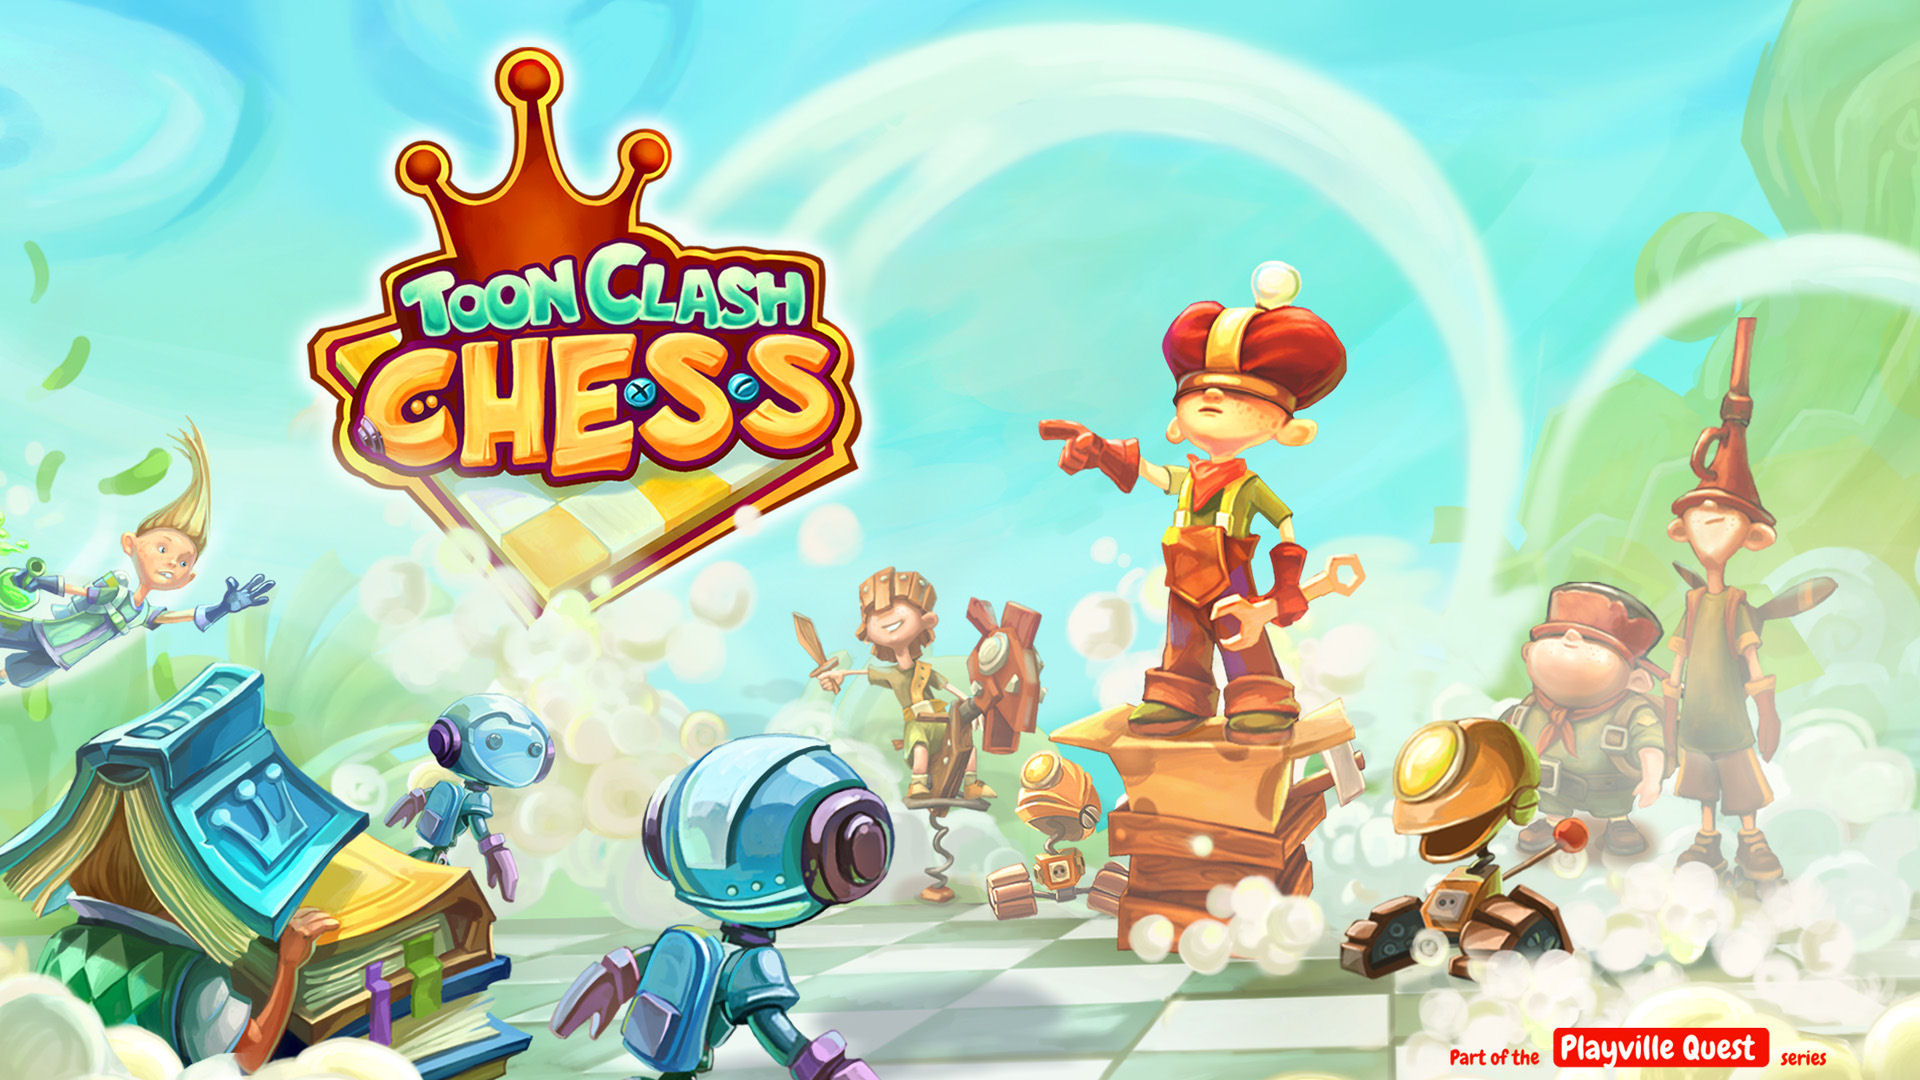 free for ios download Toon Clash CHESS